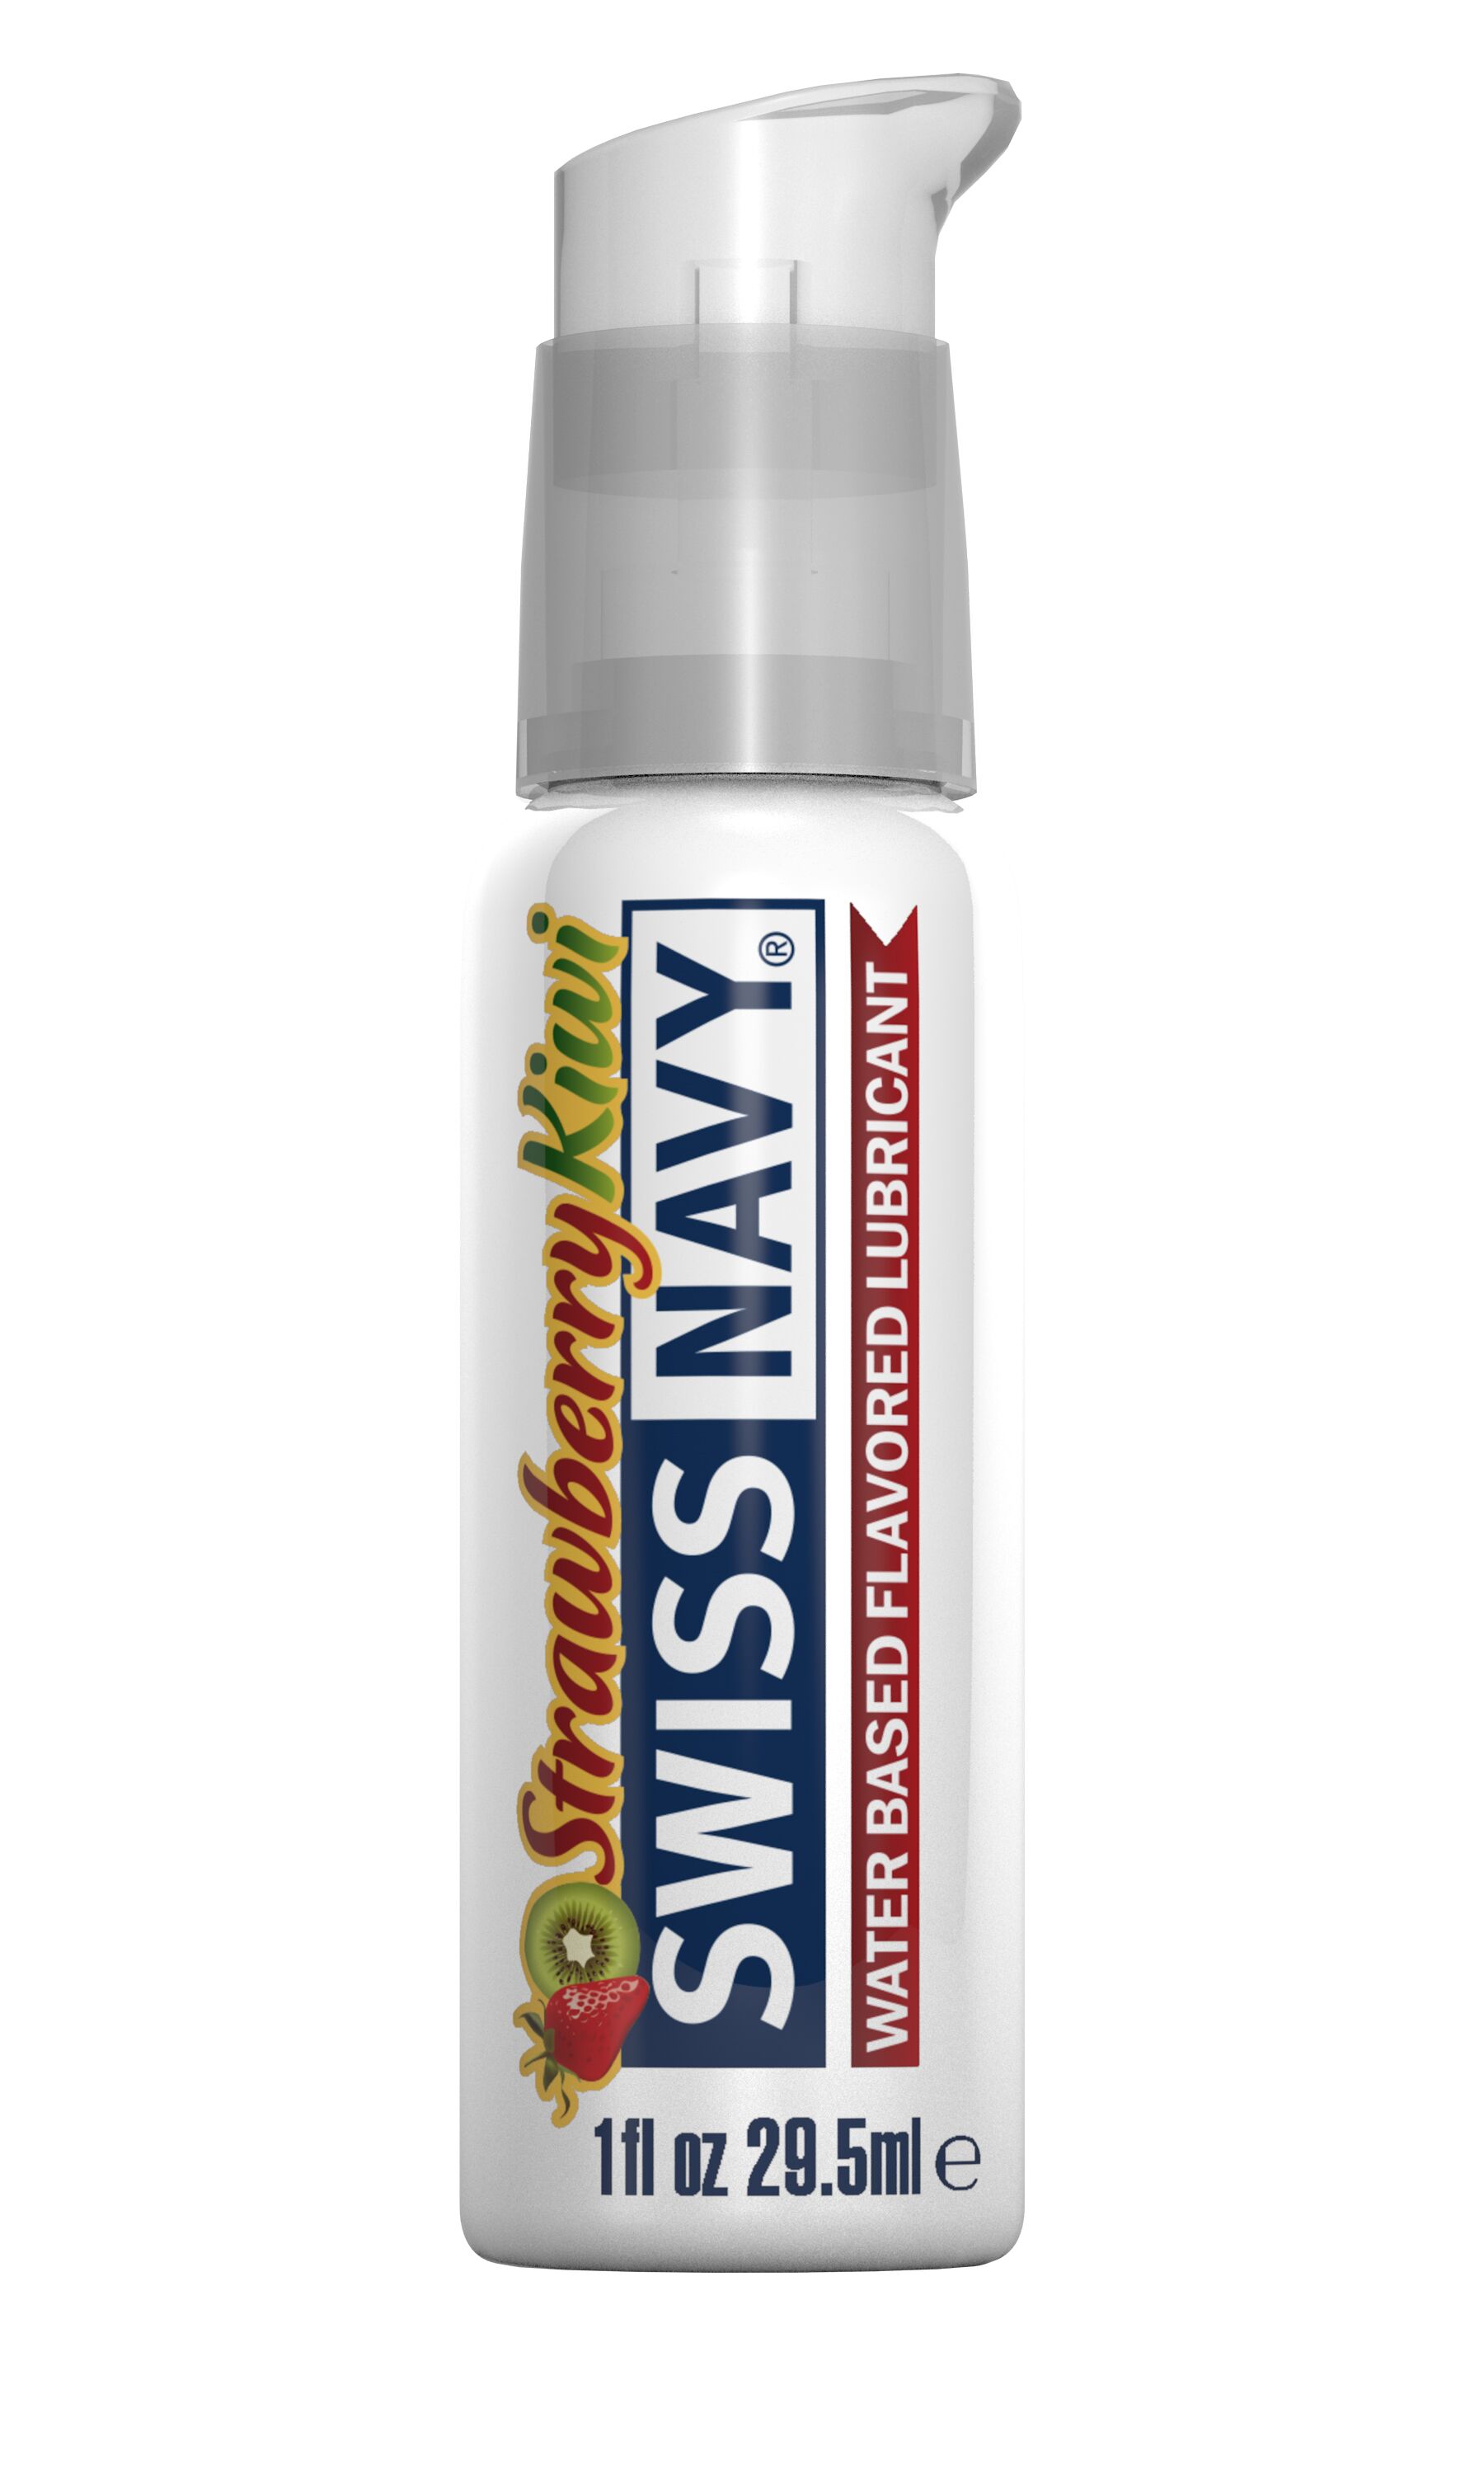 SWISS NAVY STRAWBERRY KIWI FLAVORED LUBE 1 OZ - Click Image to Close